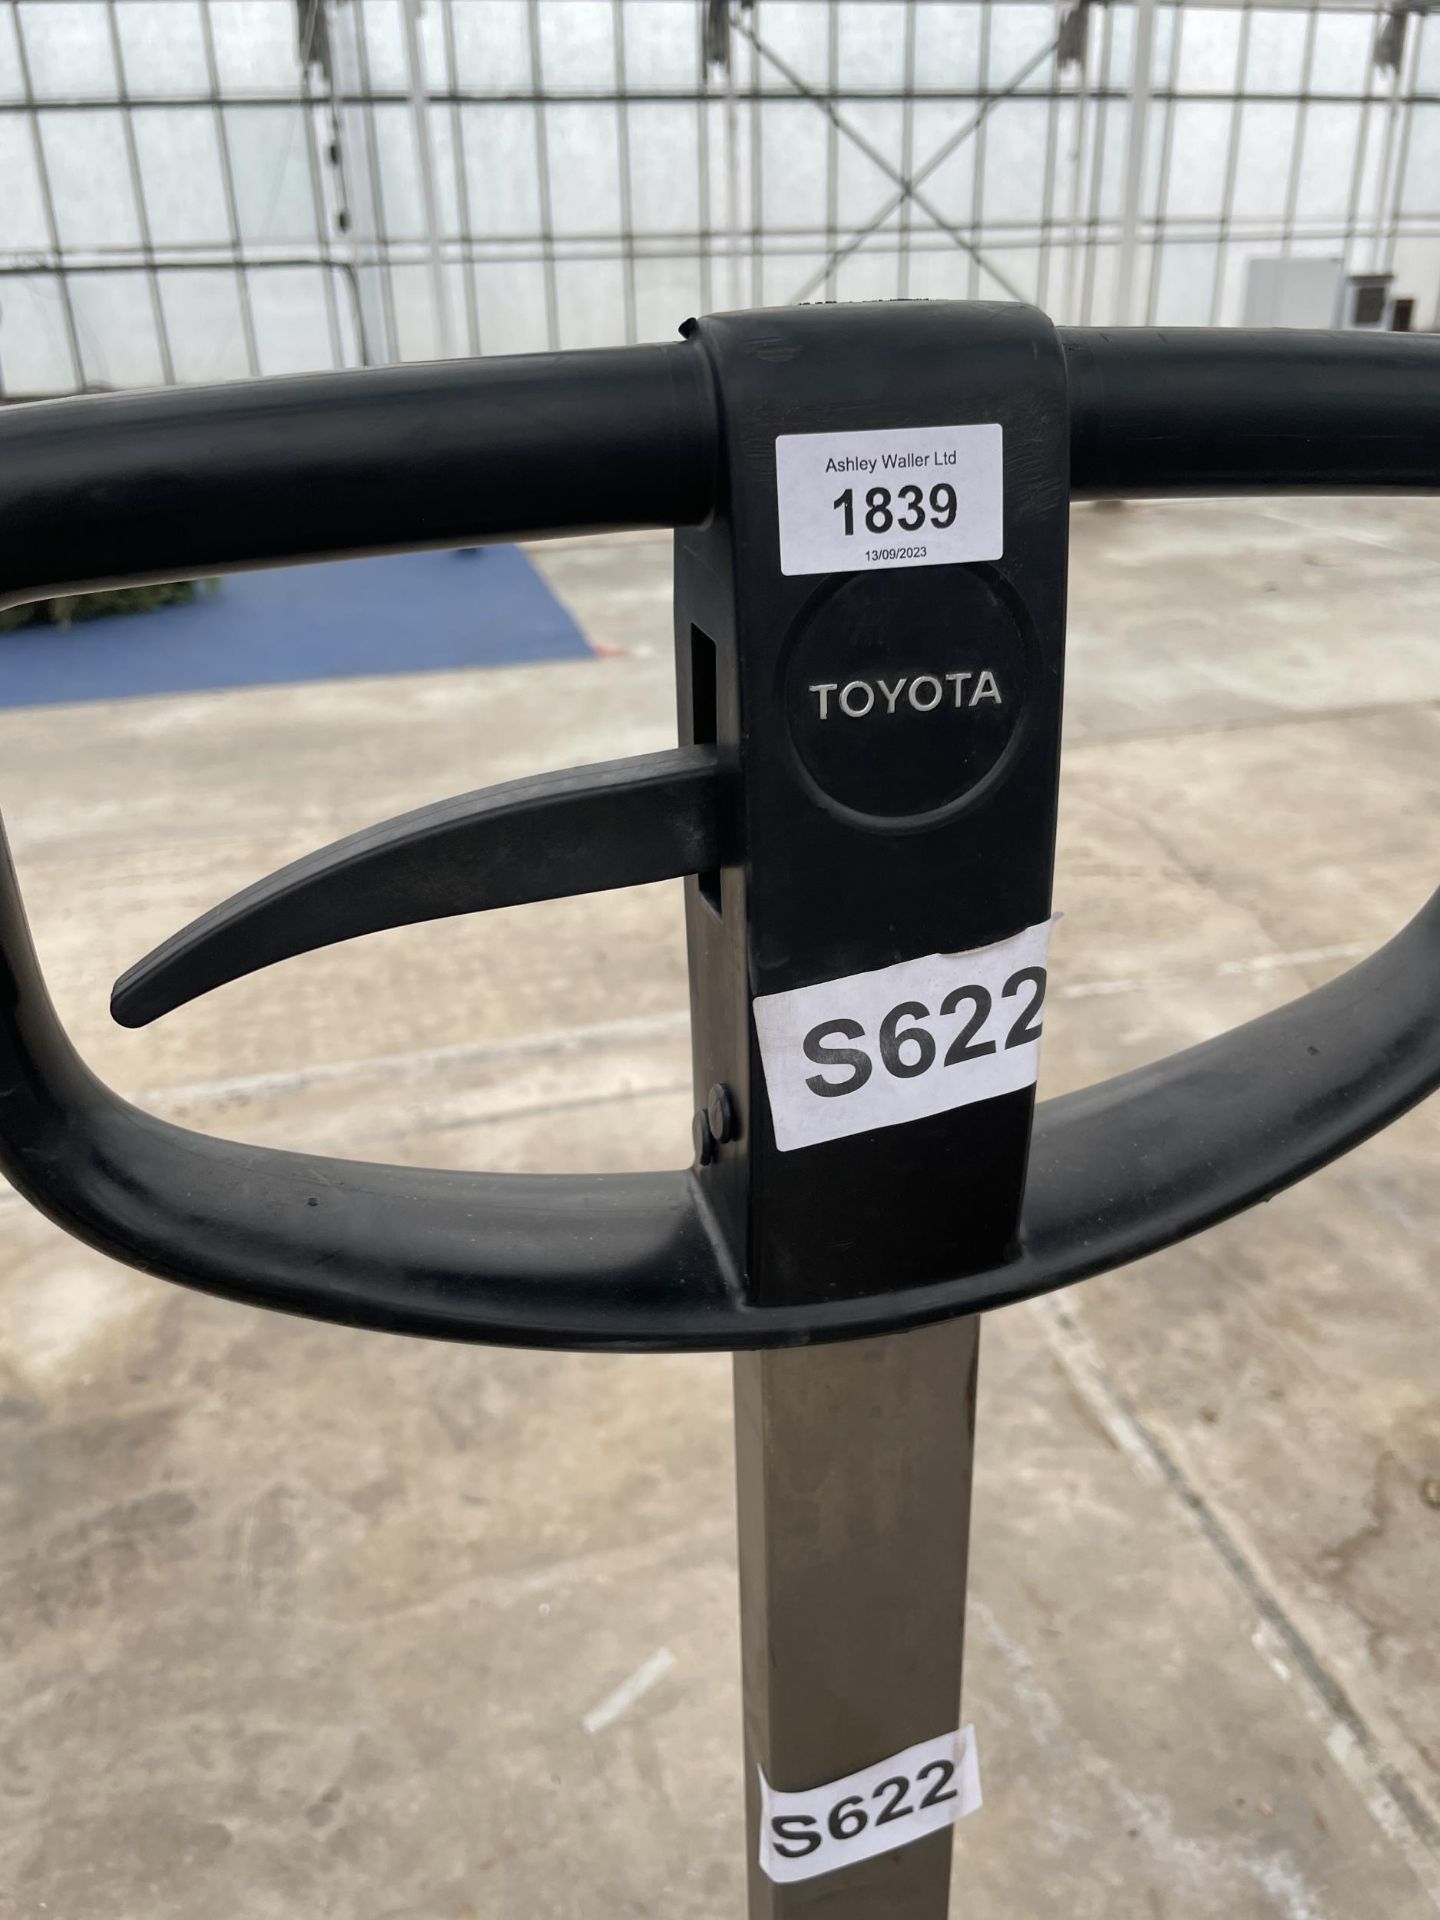 A STAINLESS STEEL TOYOTA PALLET PUMP TRUCK (AS NEW) - Image 4 of 4